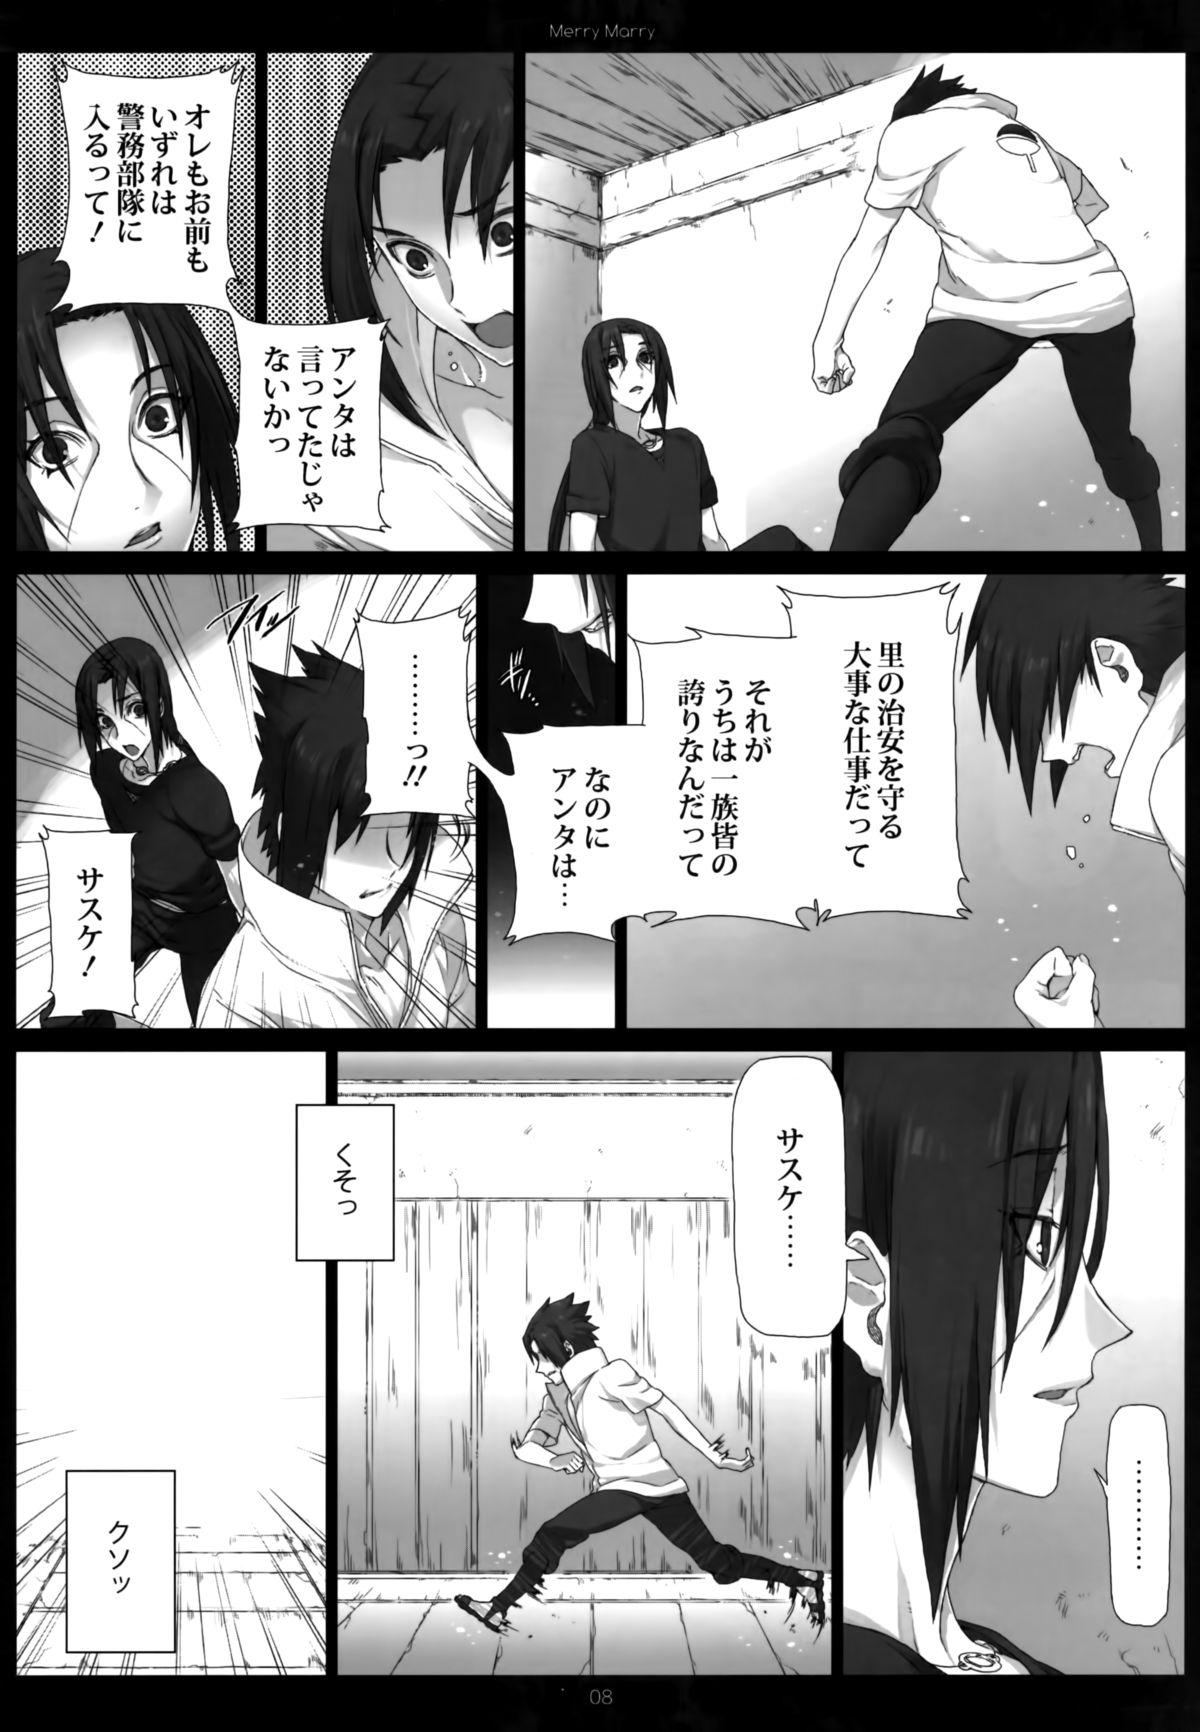 Solo Female Merry Marry - Naruto Shower - Page 8